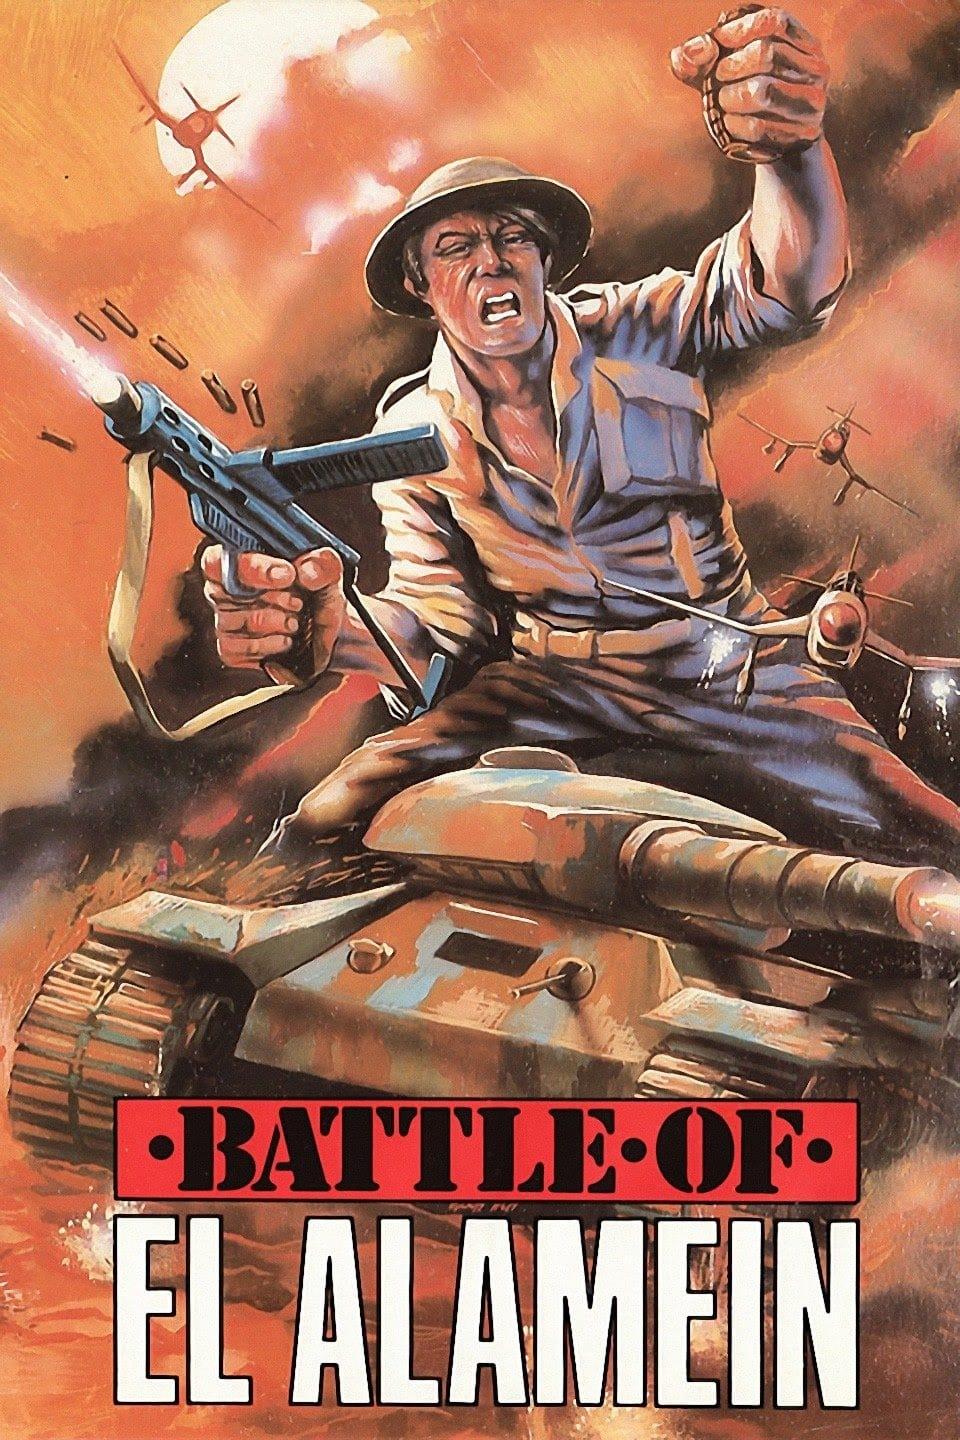 The Battle of El Alamein poster